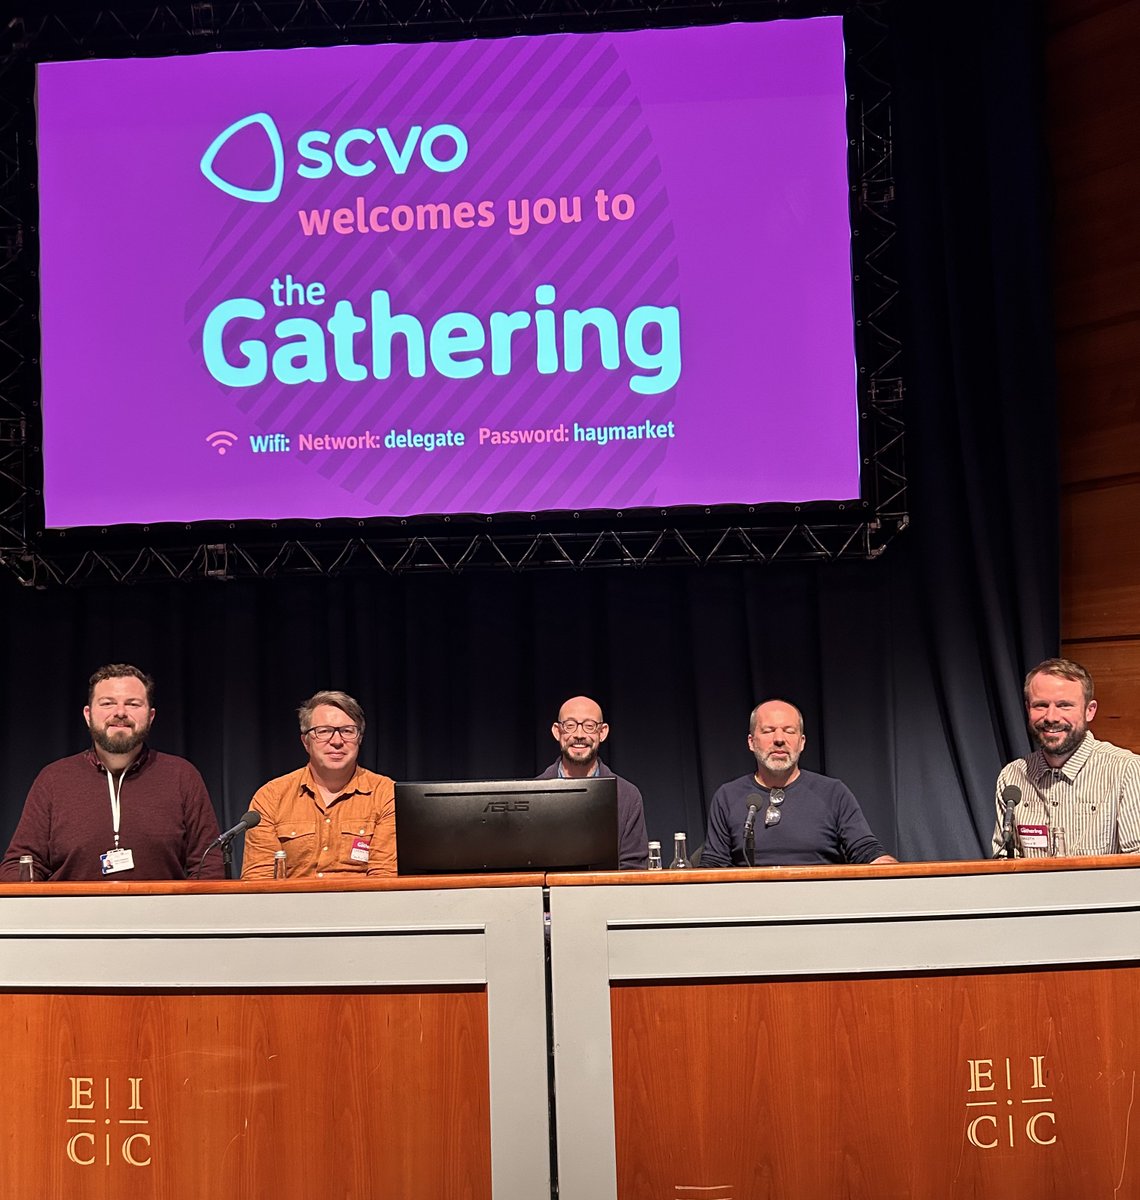 A big thank you to all who came along to our live recording of Equality in Housing at #SCVOGathering yesterday - and massive thanks to our panellists for contributing their insights. You'll be able to listen to the conversation soon!